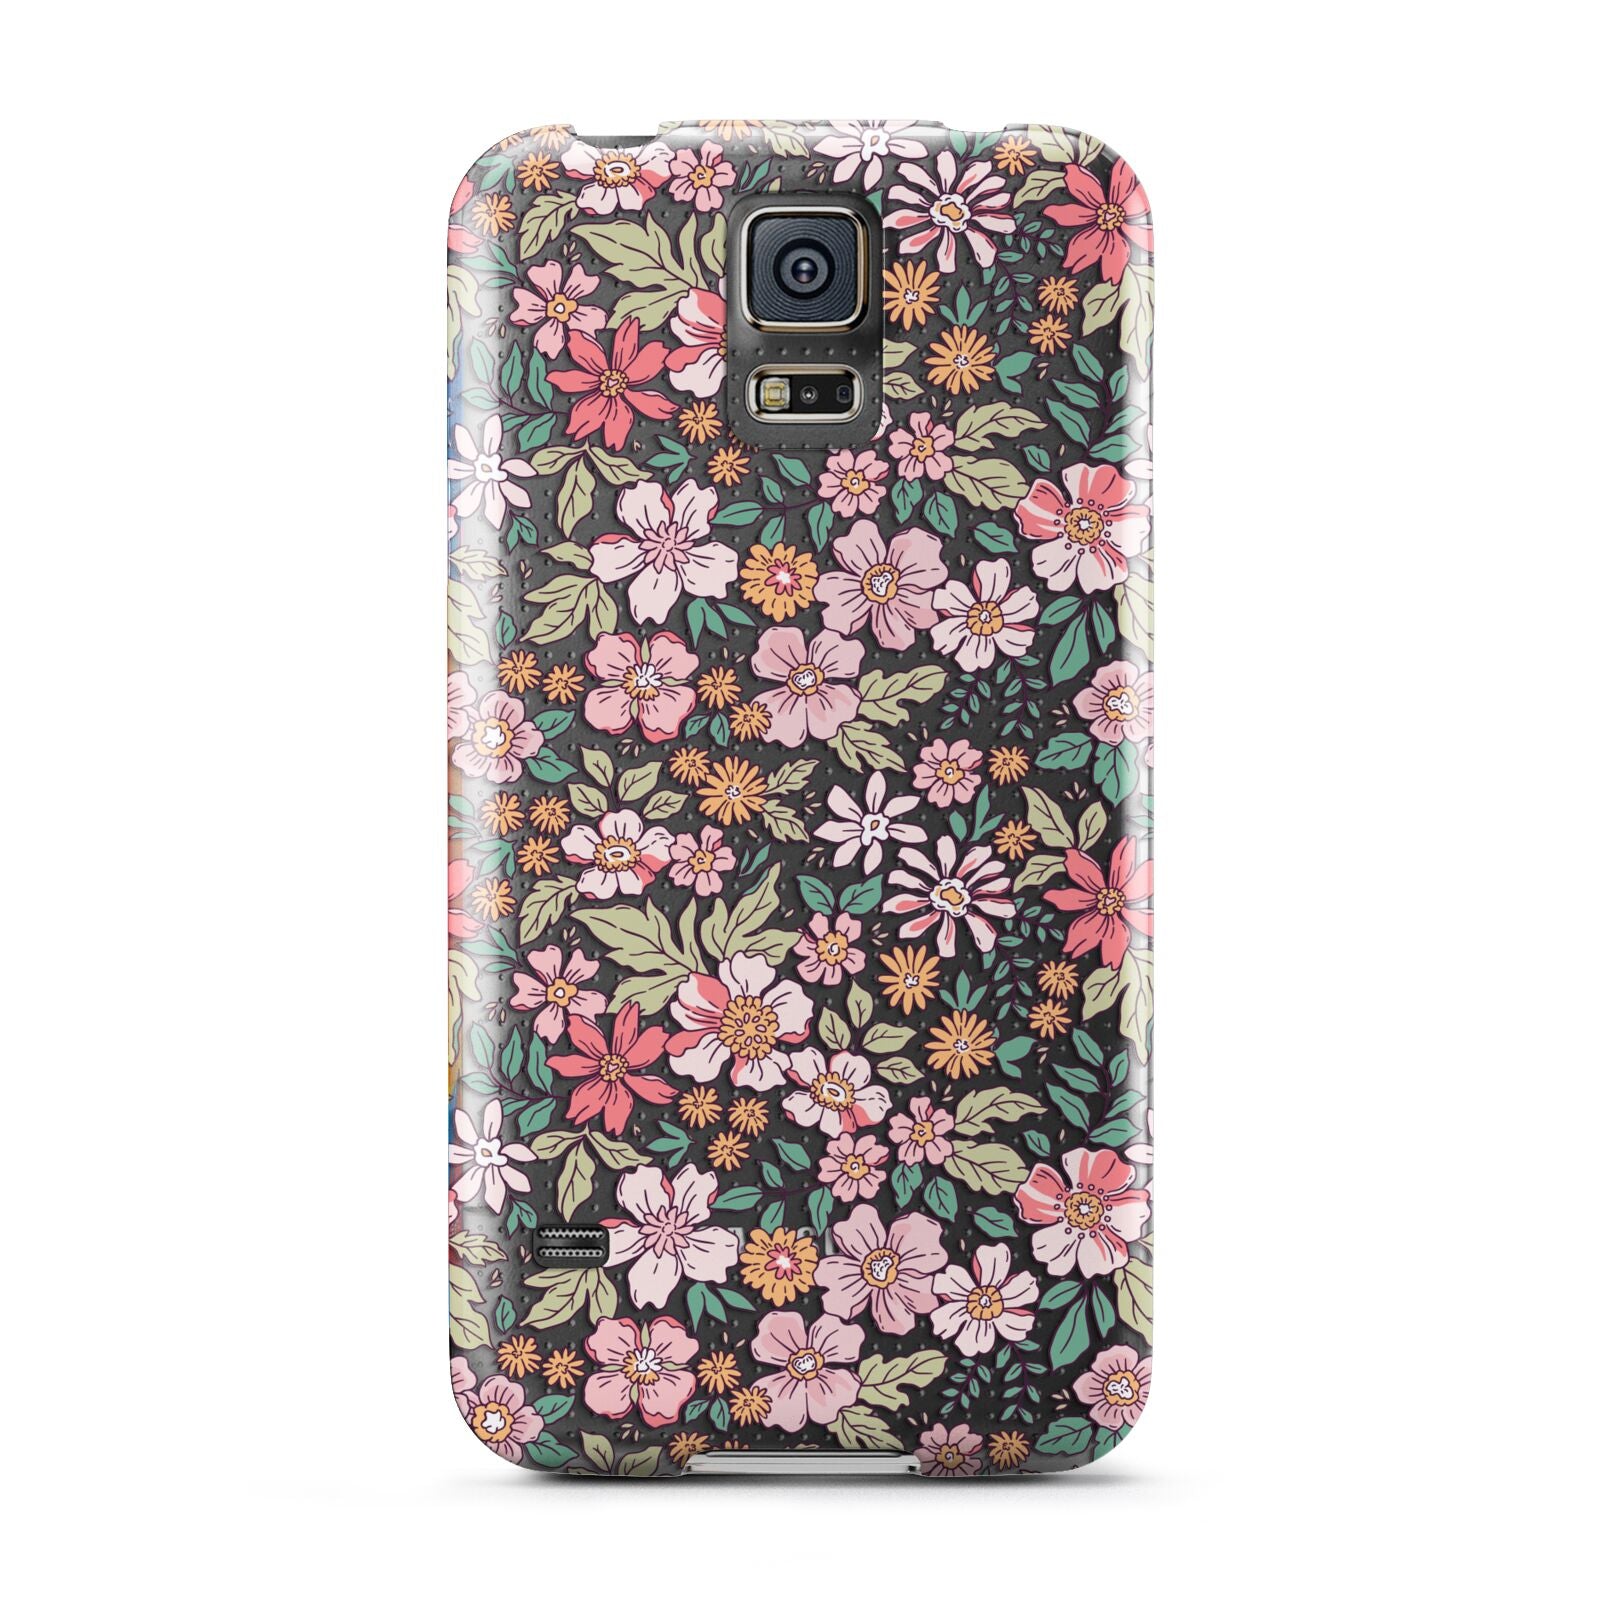 Small Floral Pattern Samsung Galaxy S5 Case